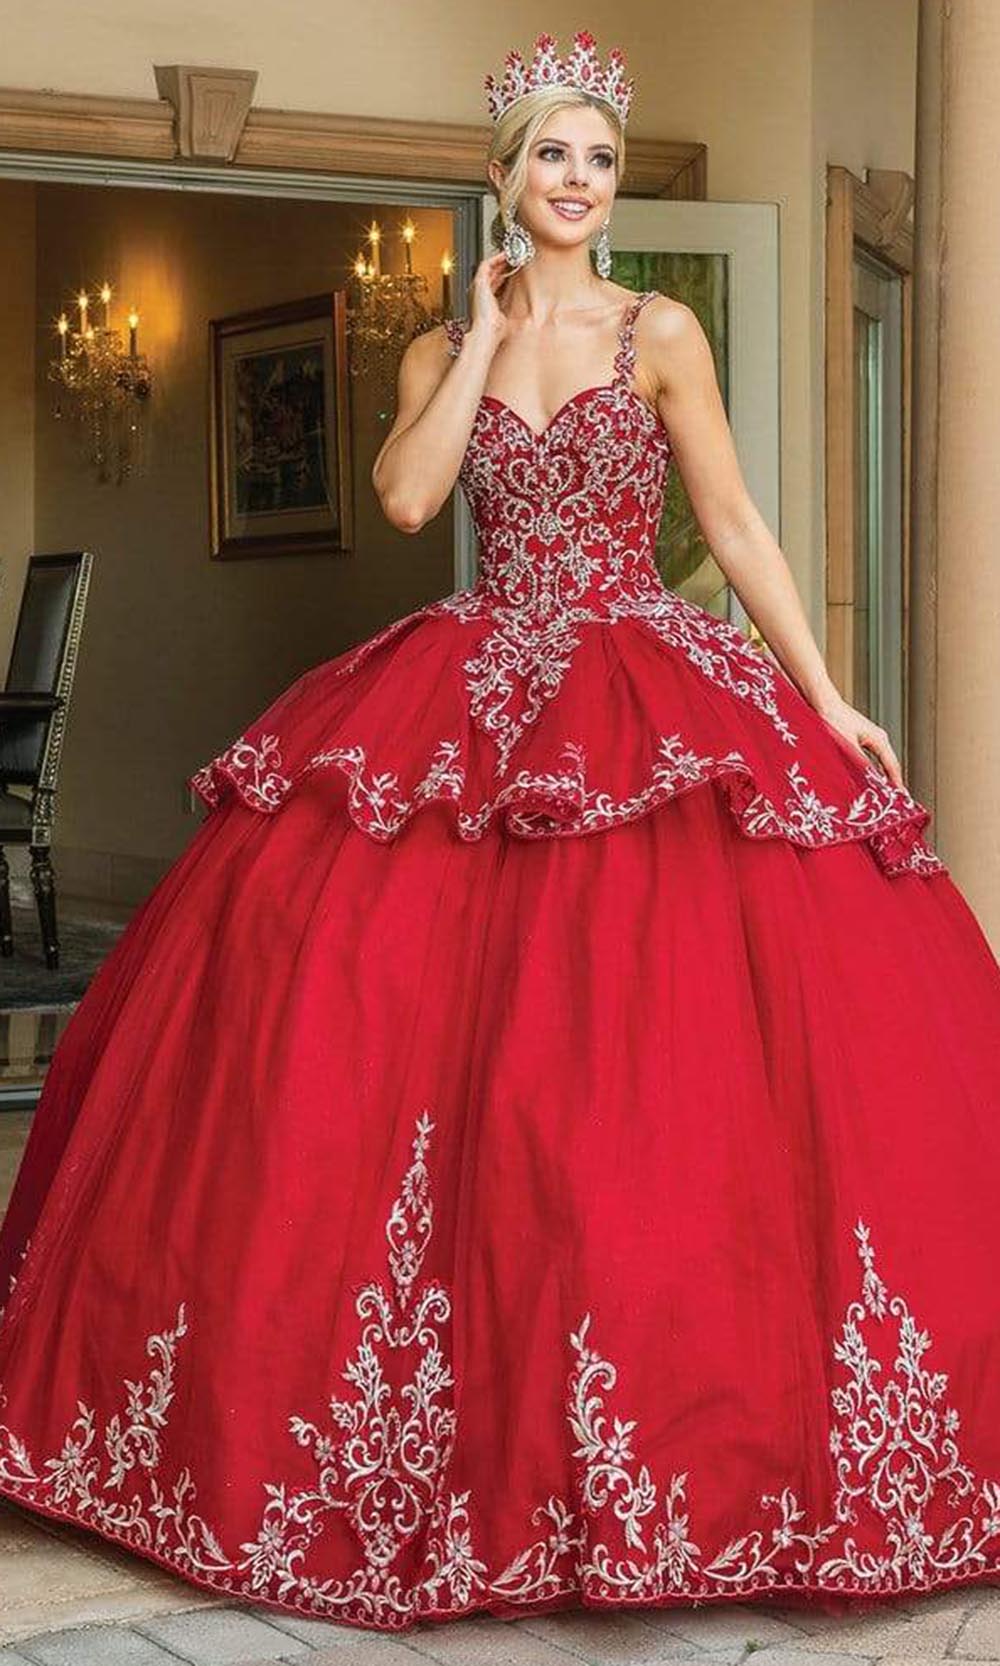 Dancing Queen - 1618 Thin Strap Sweetheart Tiered Ballgown Special Occasion Dress XS / Burgundy